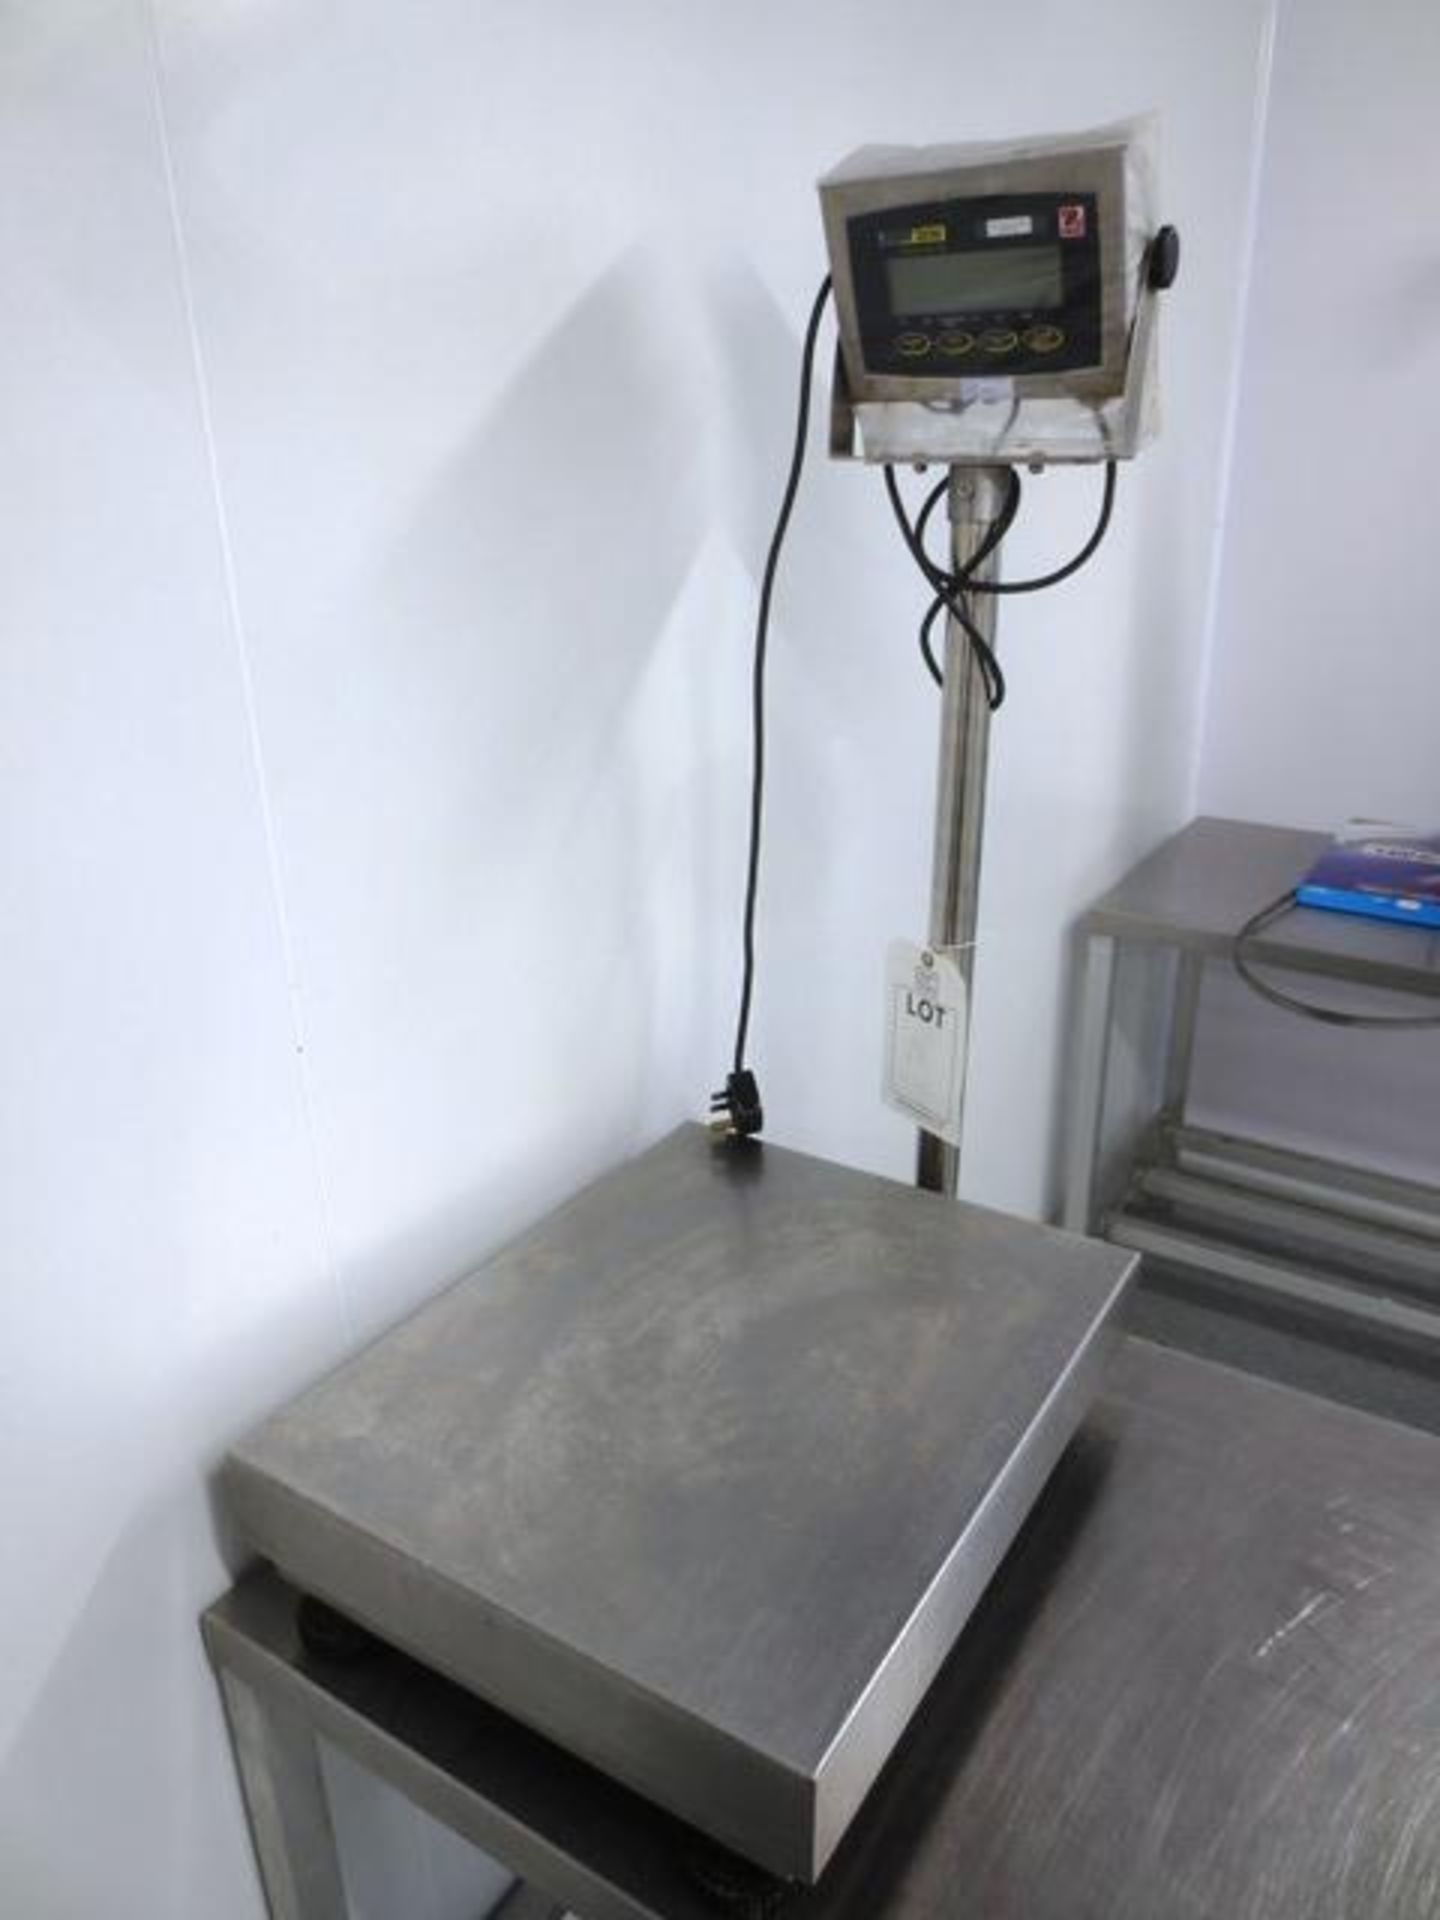 Ohaus Xtreme W3000 series electronic bench scale, model T31XW, serial no: 0062496-6GL